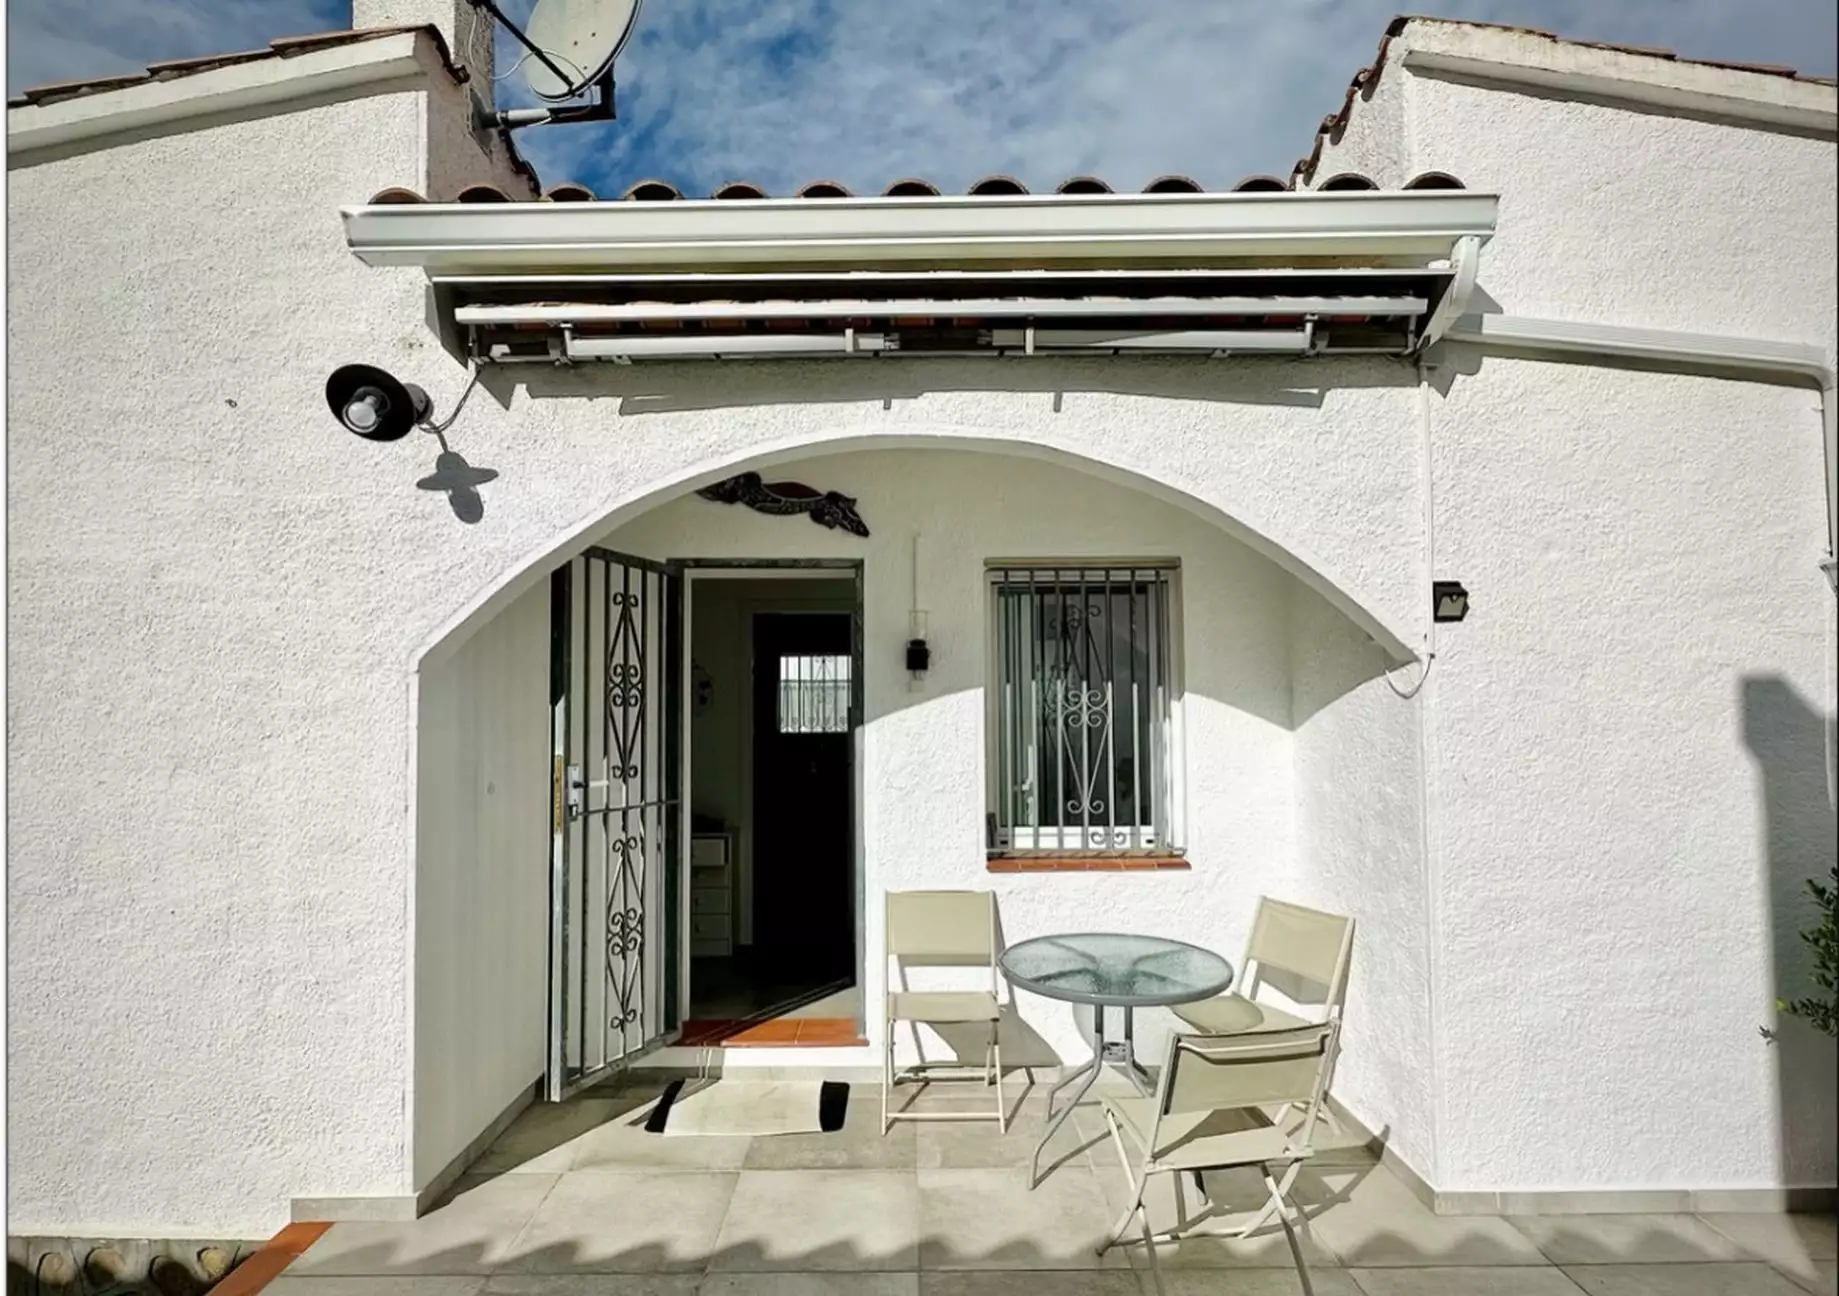 Renovated ground floor house with pool and garage for sale in Empuriabrava.